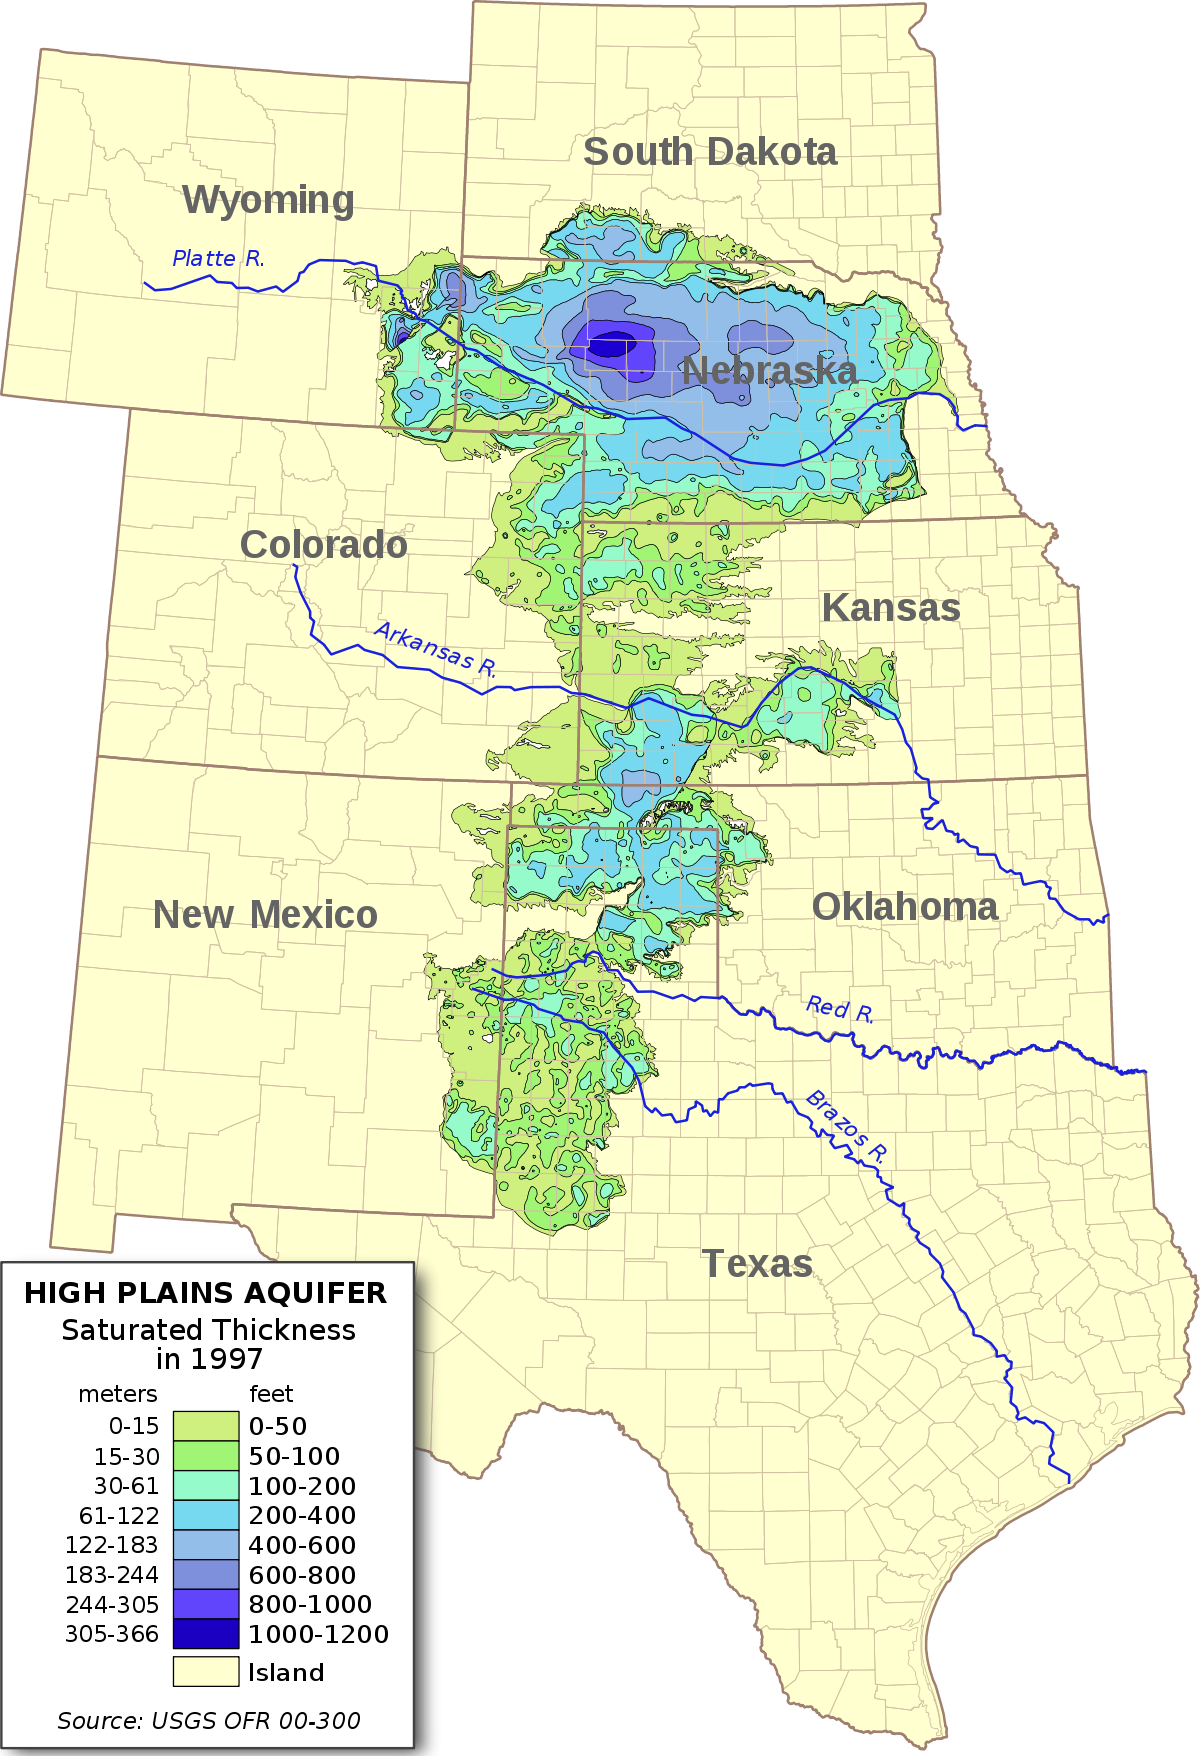 NEWS NOTES ON SUSTAINABLE WATER RESOURCESOgallala Aquiferhttps://en.wikipedia.org/wiki/Ogallala_Aquifer&ldquo;The Ogallala Aquifer (oh-guh-LAH-lah) ...